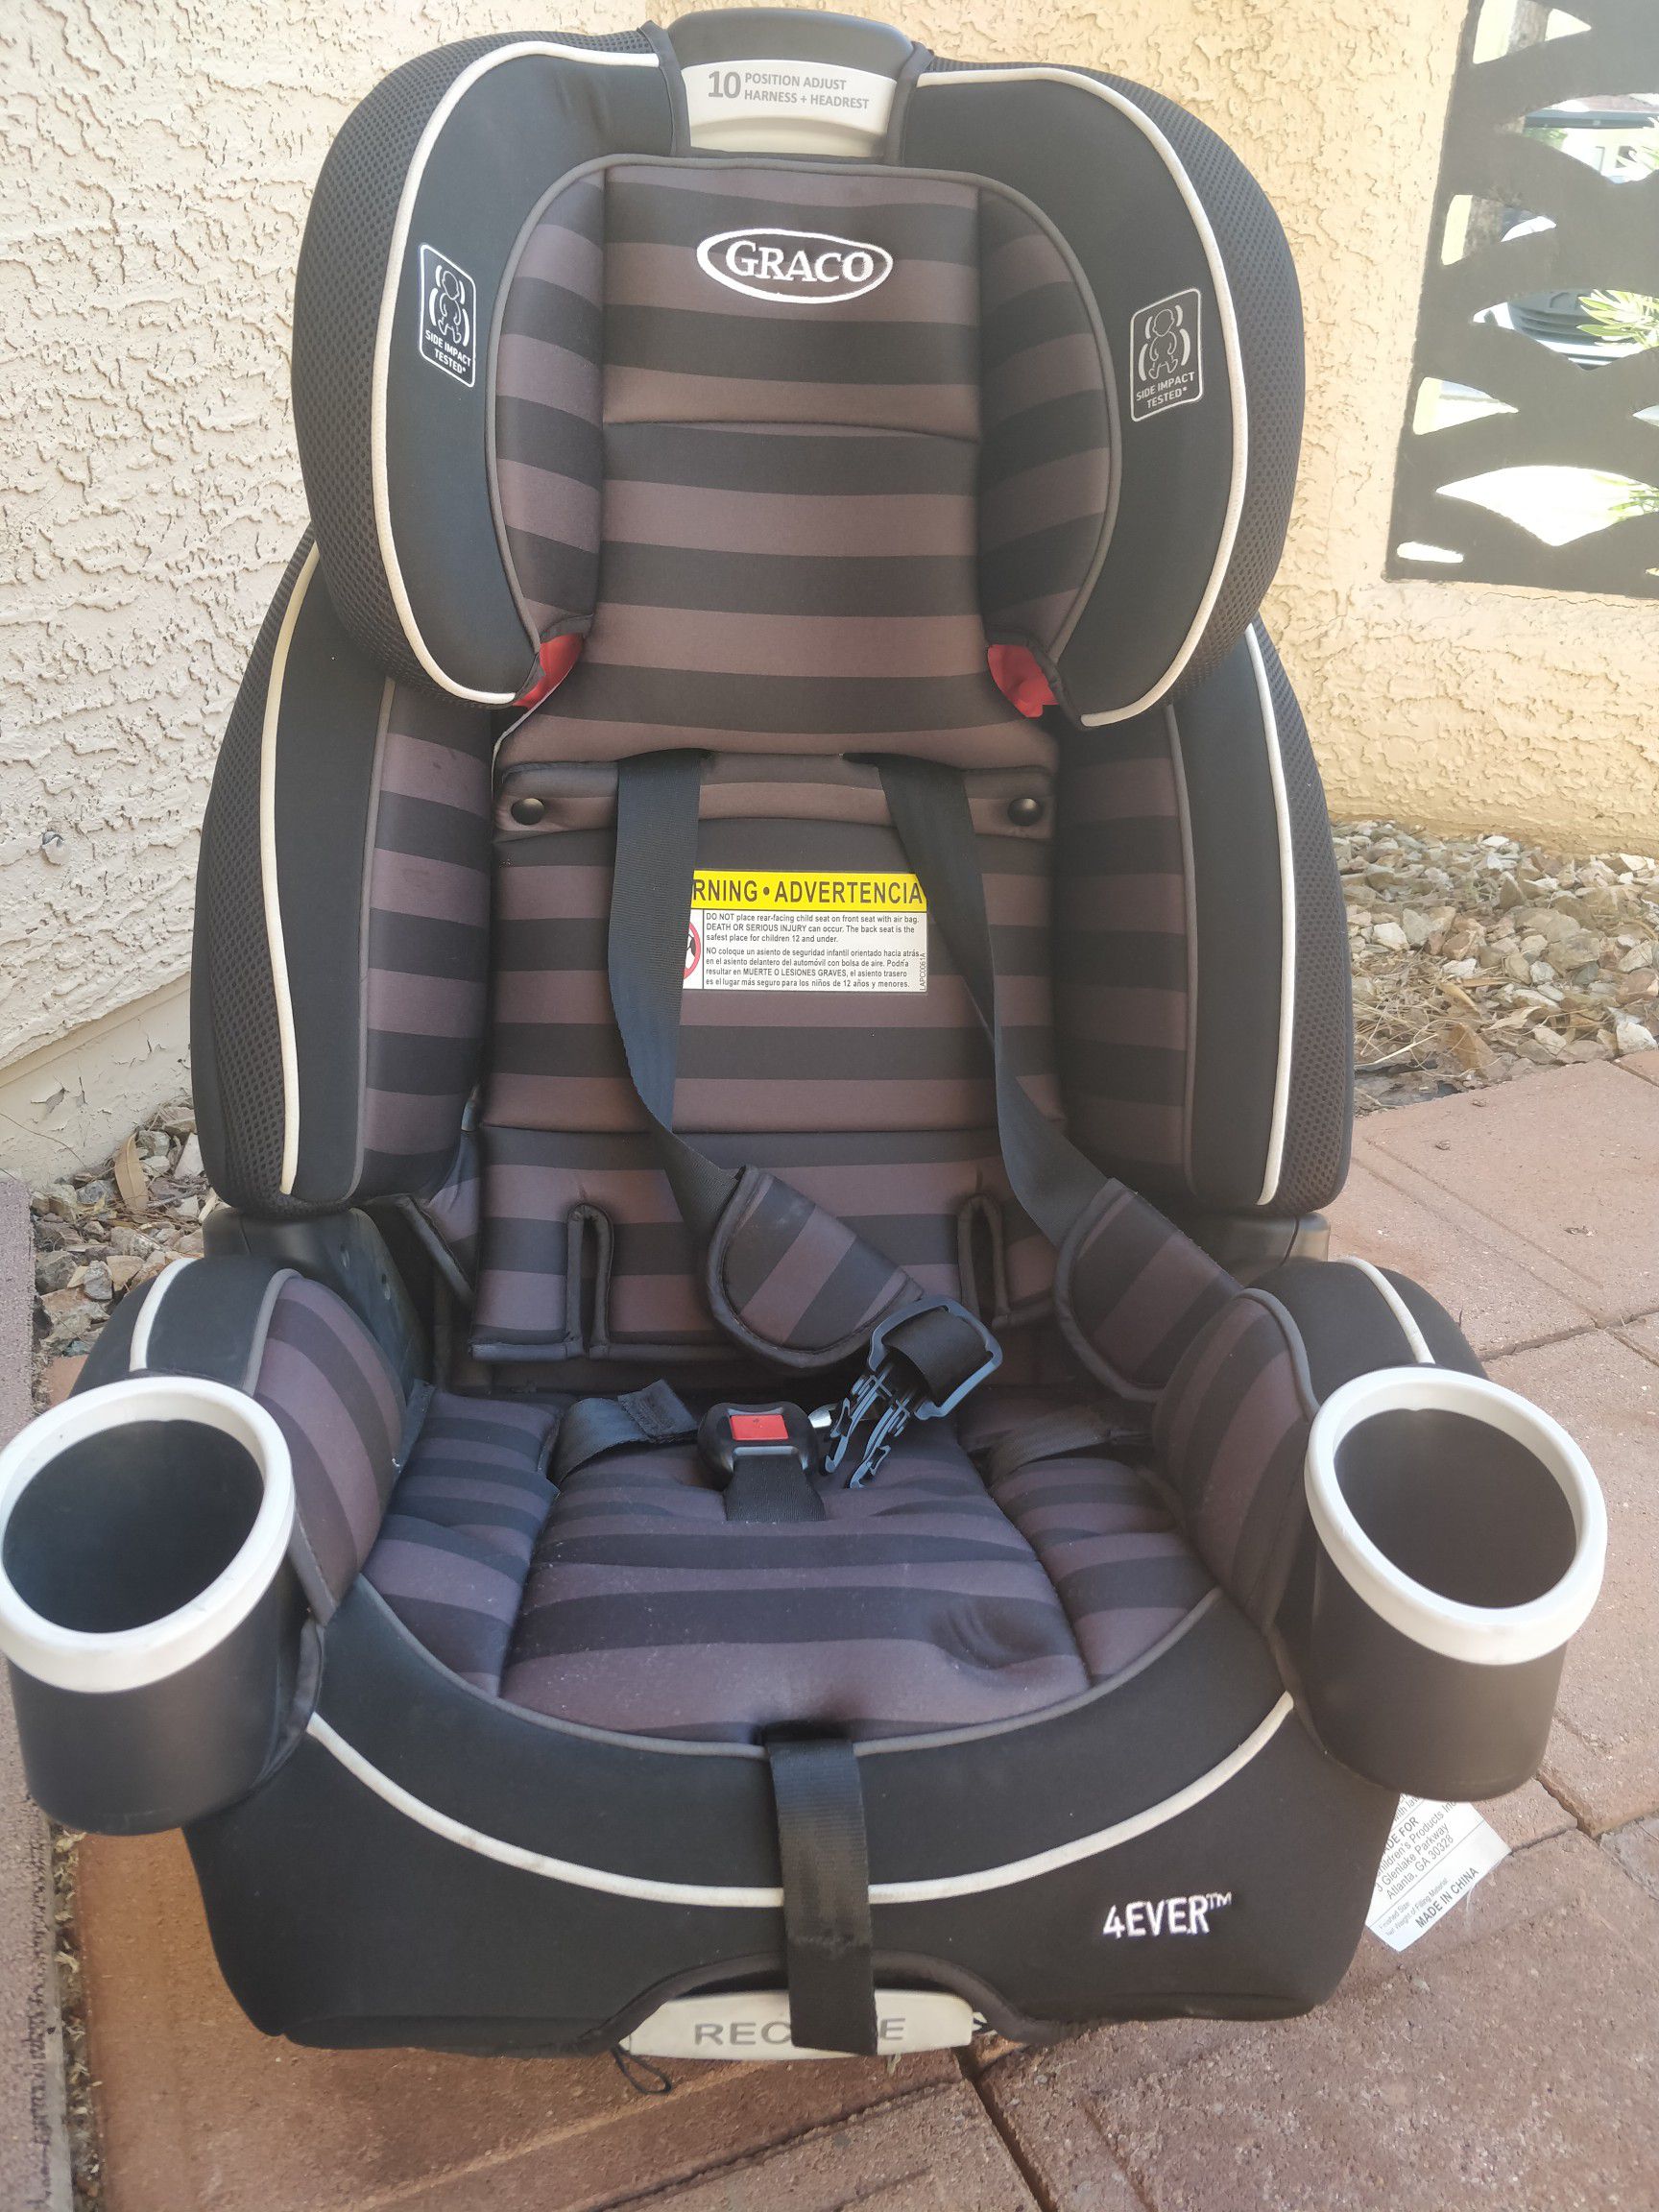 Graco 4ever 10 position car seat